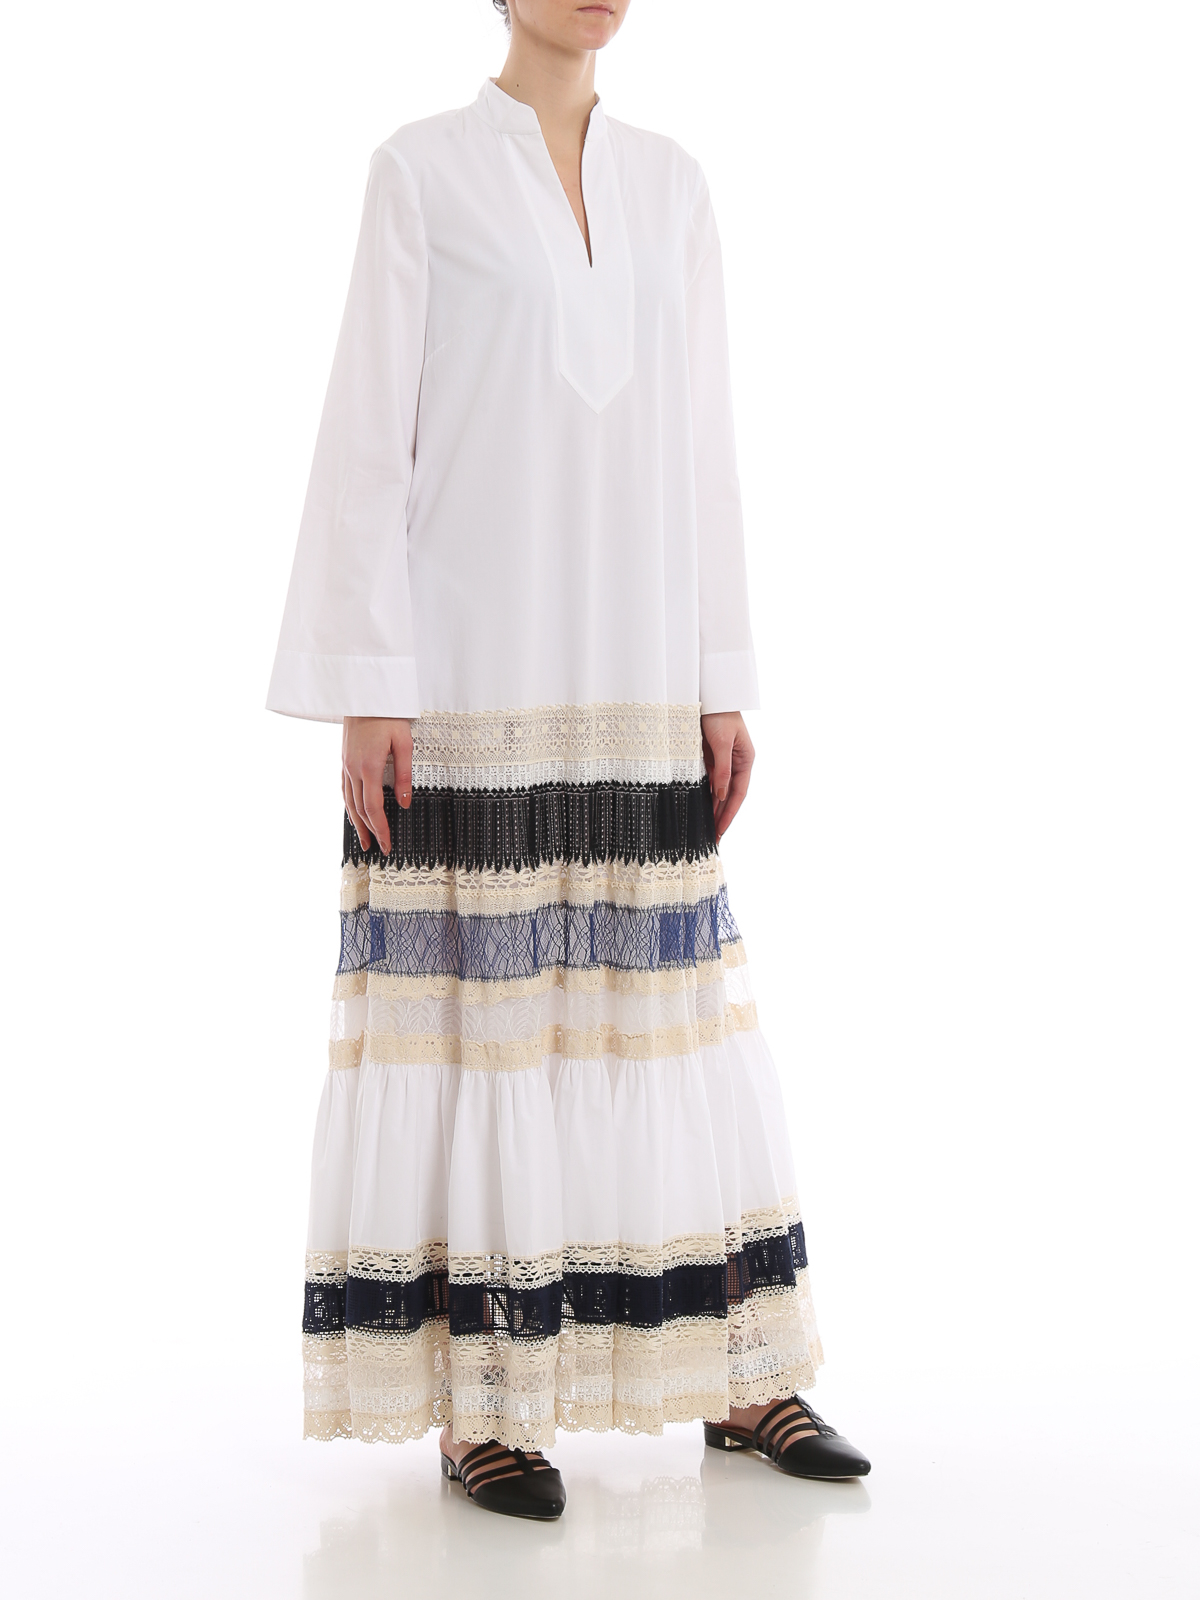 Maxi dresses Tory Burch - Lace trimmed caftan style maxi dress - 54016100